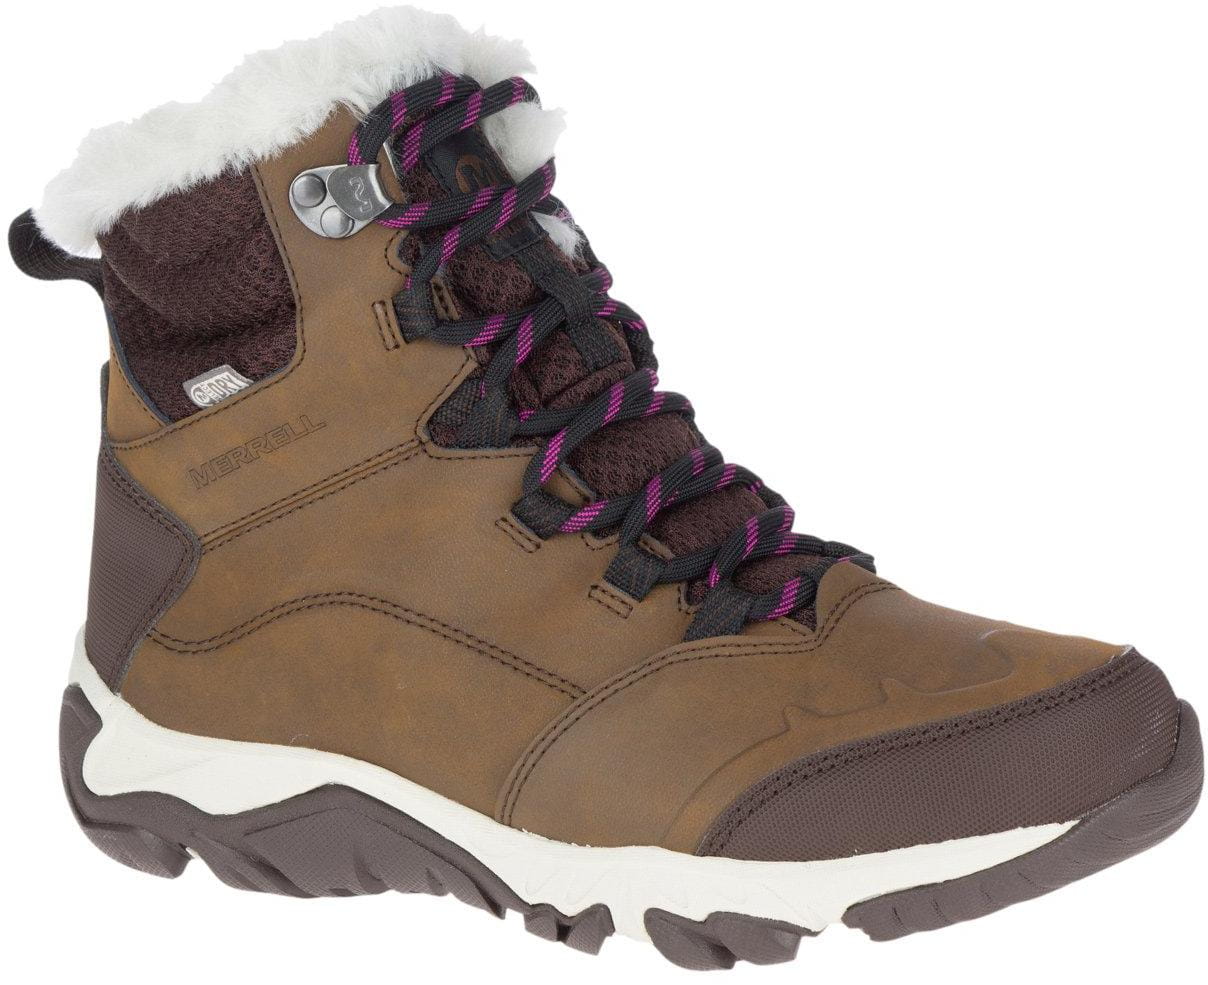 Obuwie zimowe Merrell Thermo Fractal Mid WP